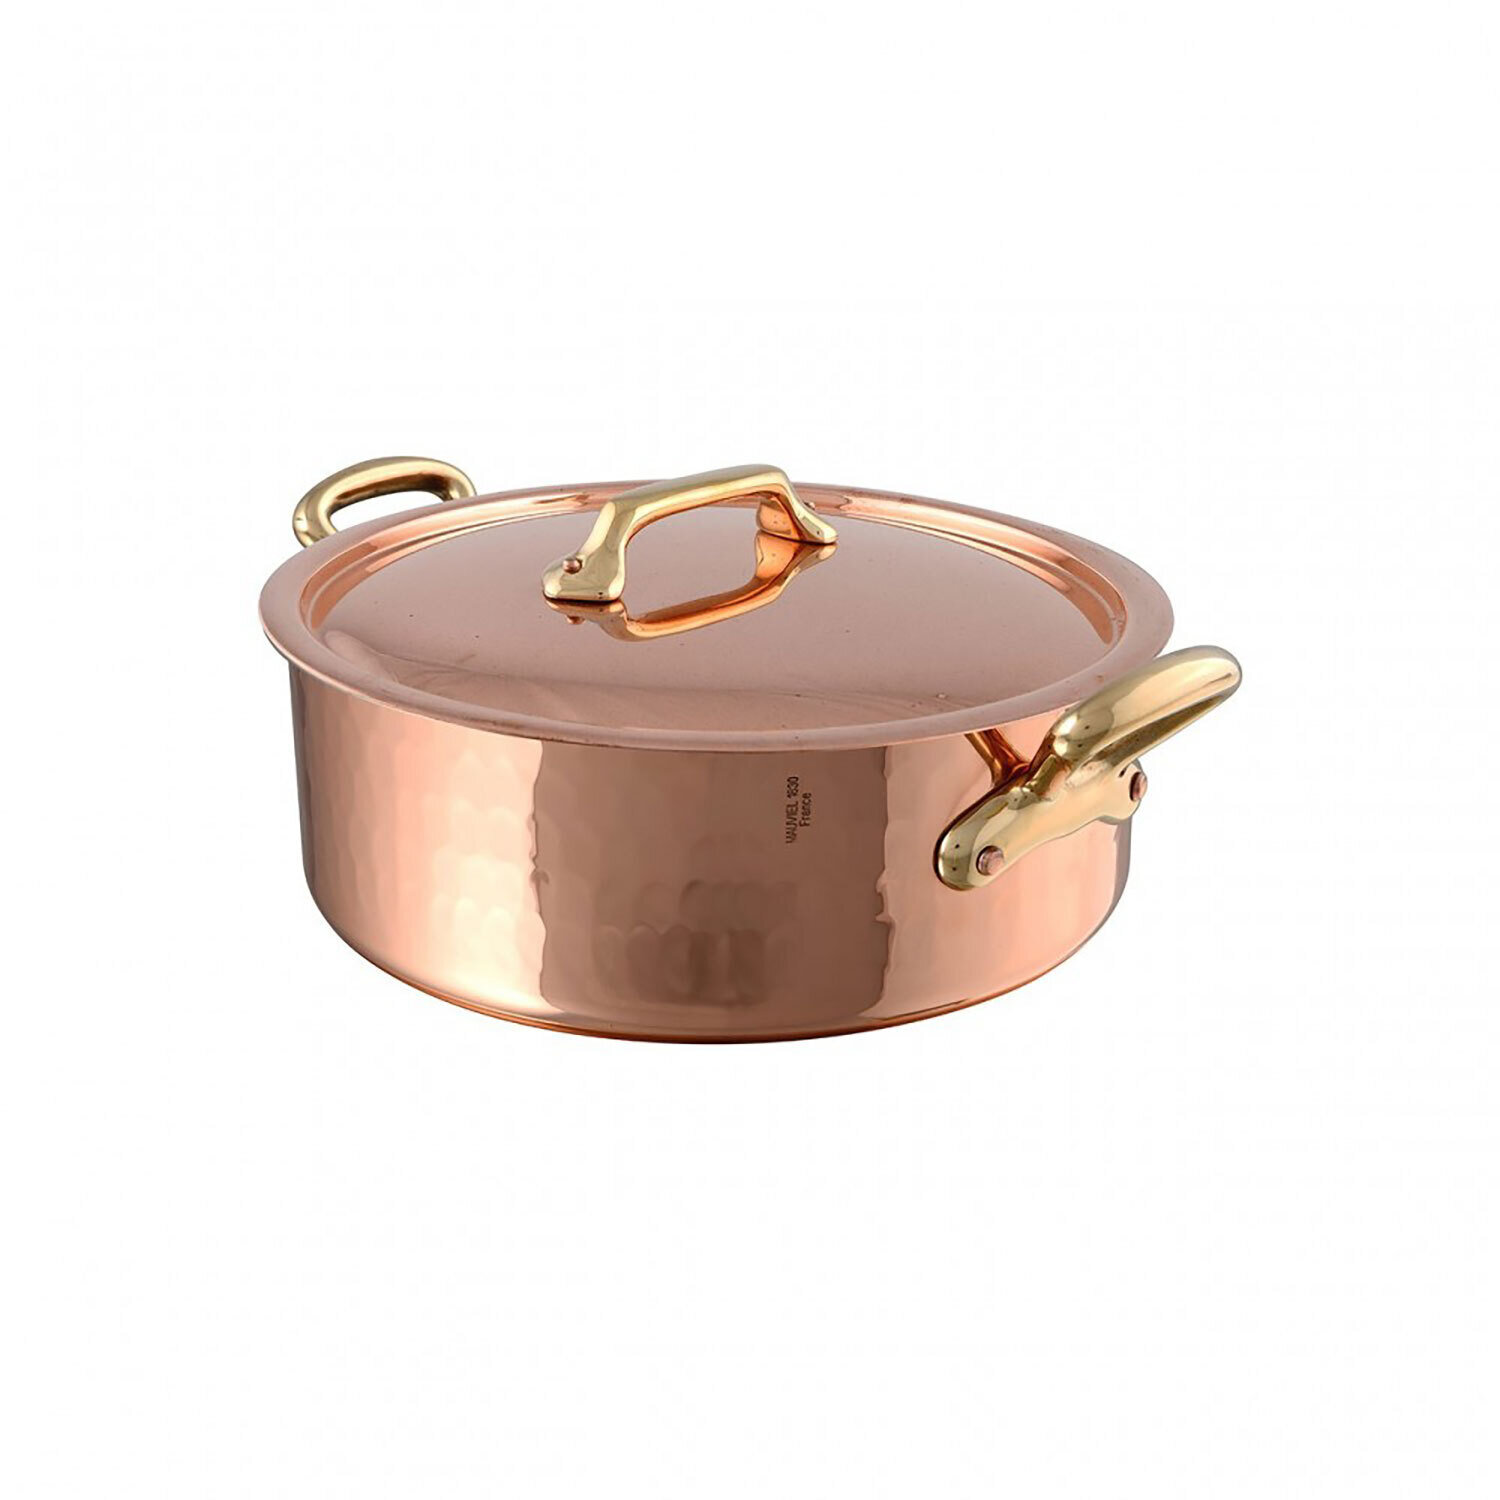 Mauviel M'Tradition Hammered Copper Rondeauwith Lid And Bronze Handles Tin Inside 36cm 215236